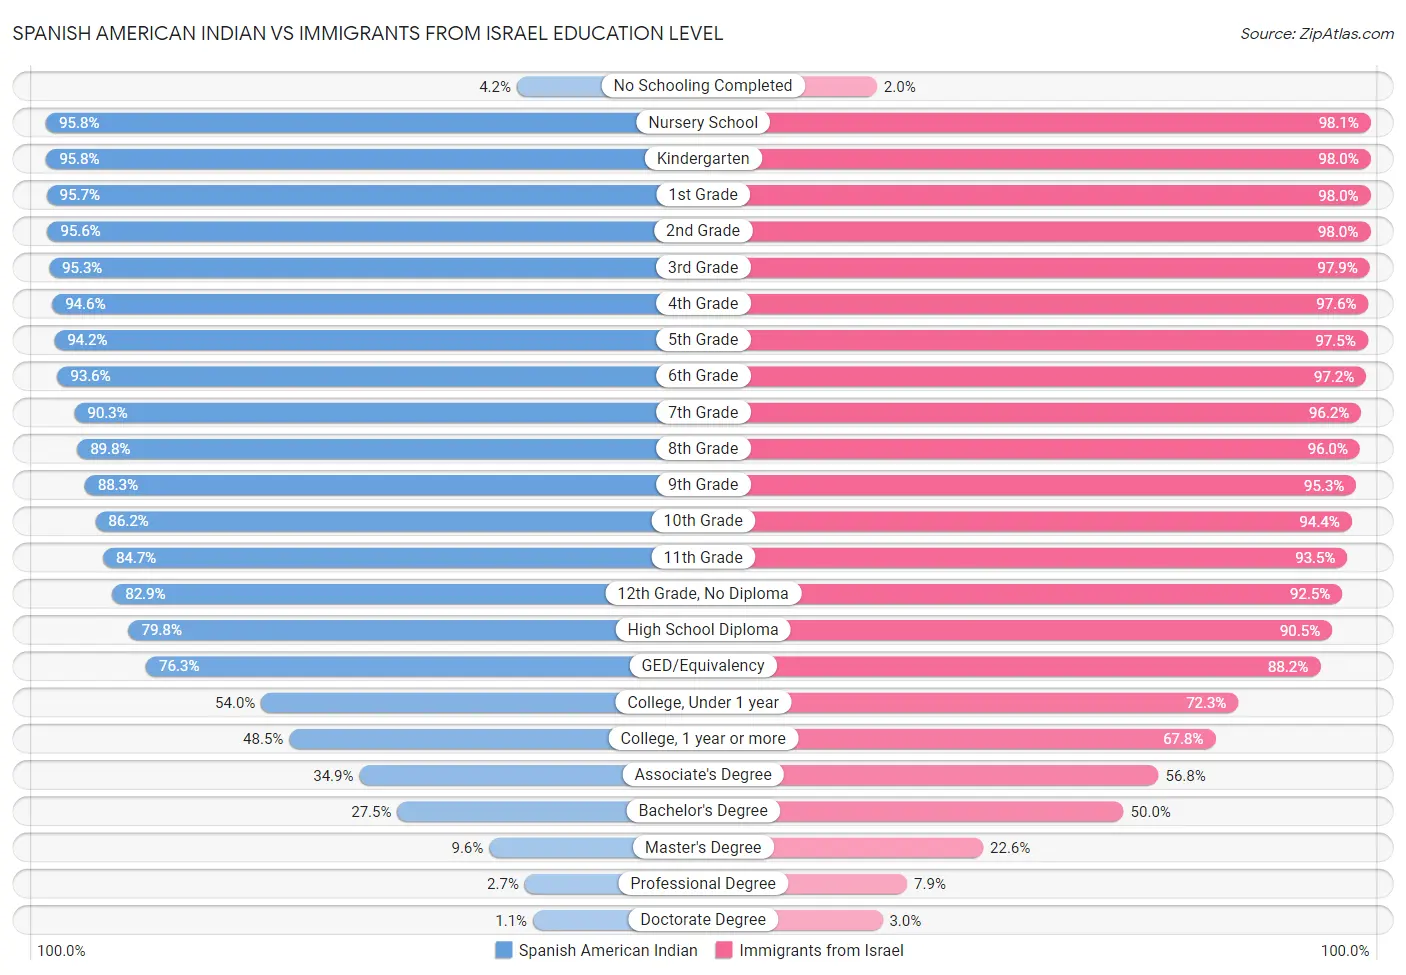 Spanish American Indian vs Immigrants from Israel Education Level